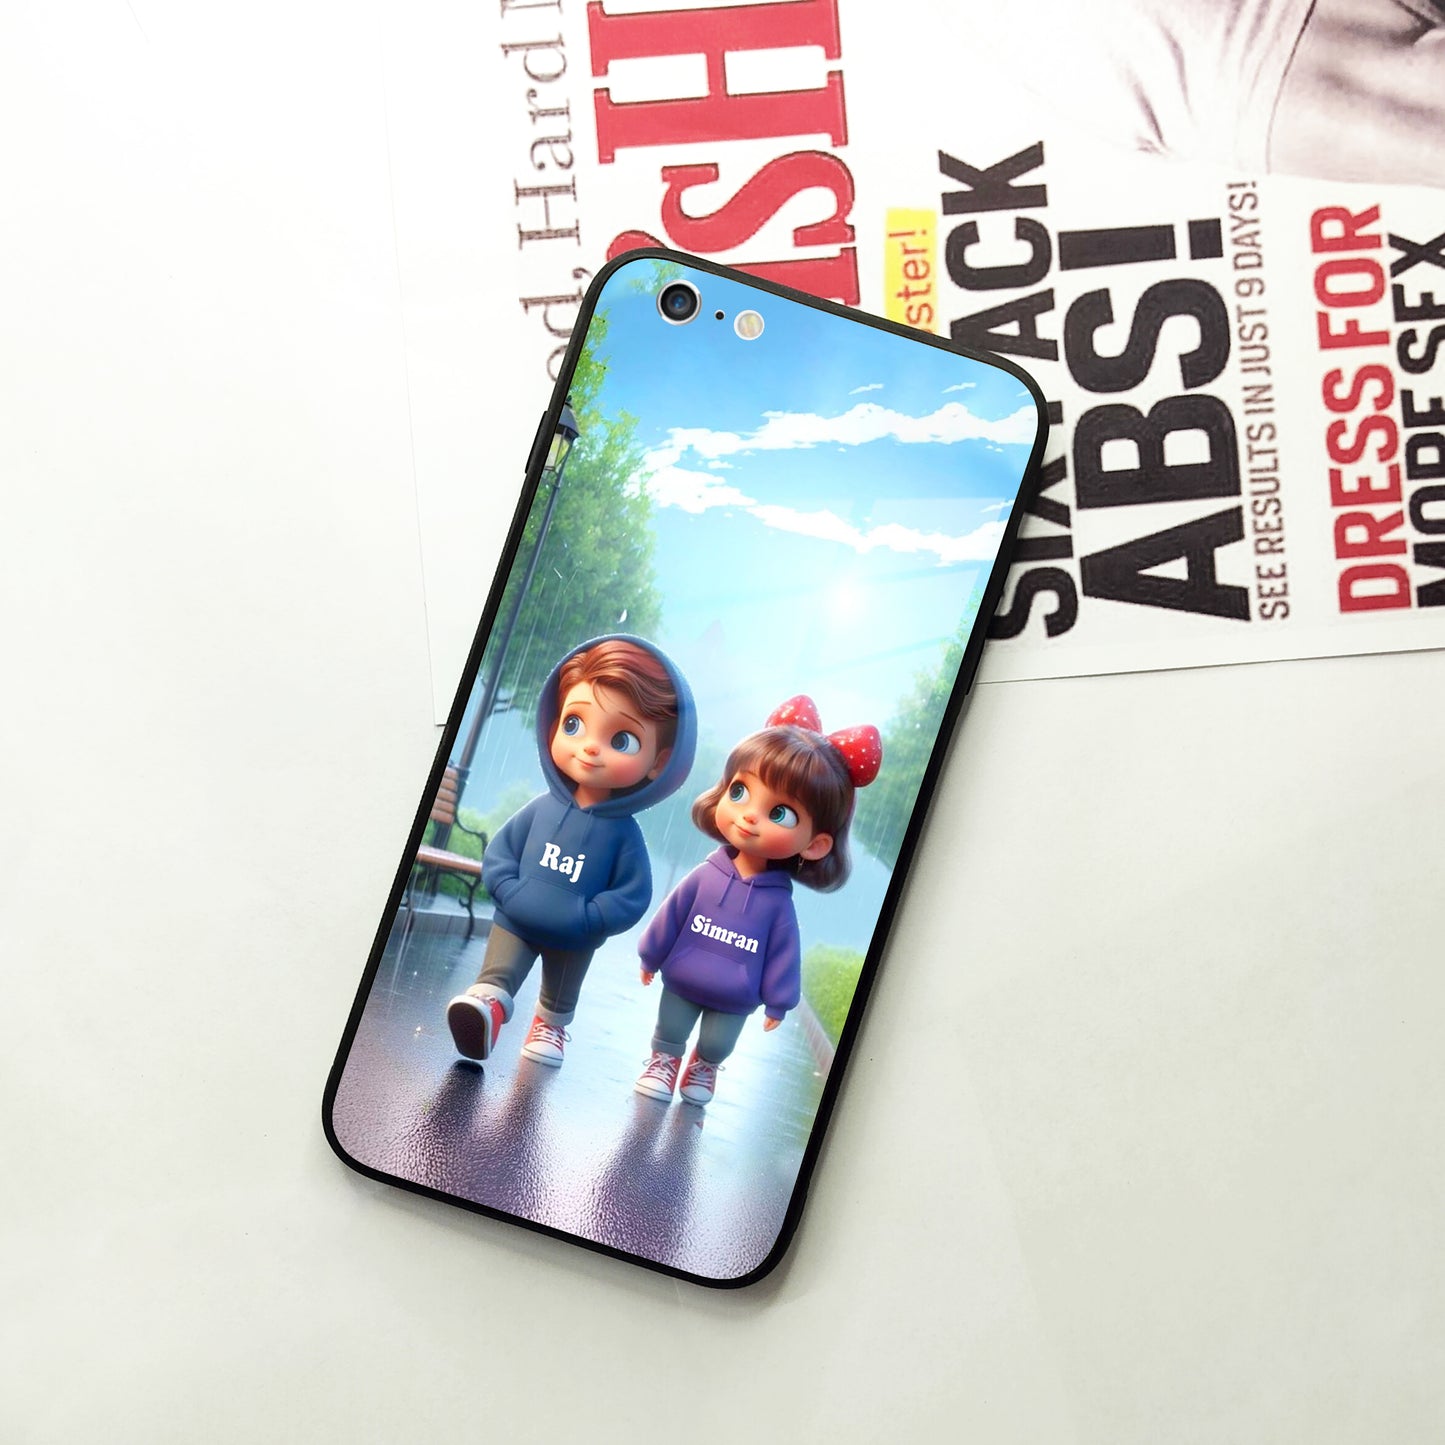 Couple Glass Case Cover For iPhone